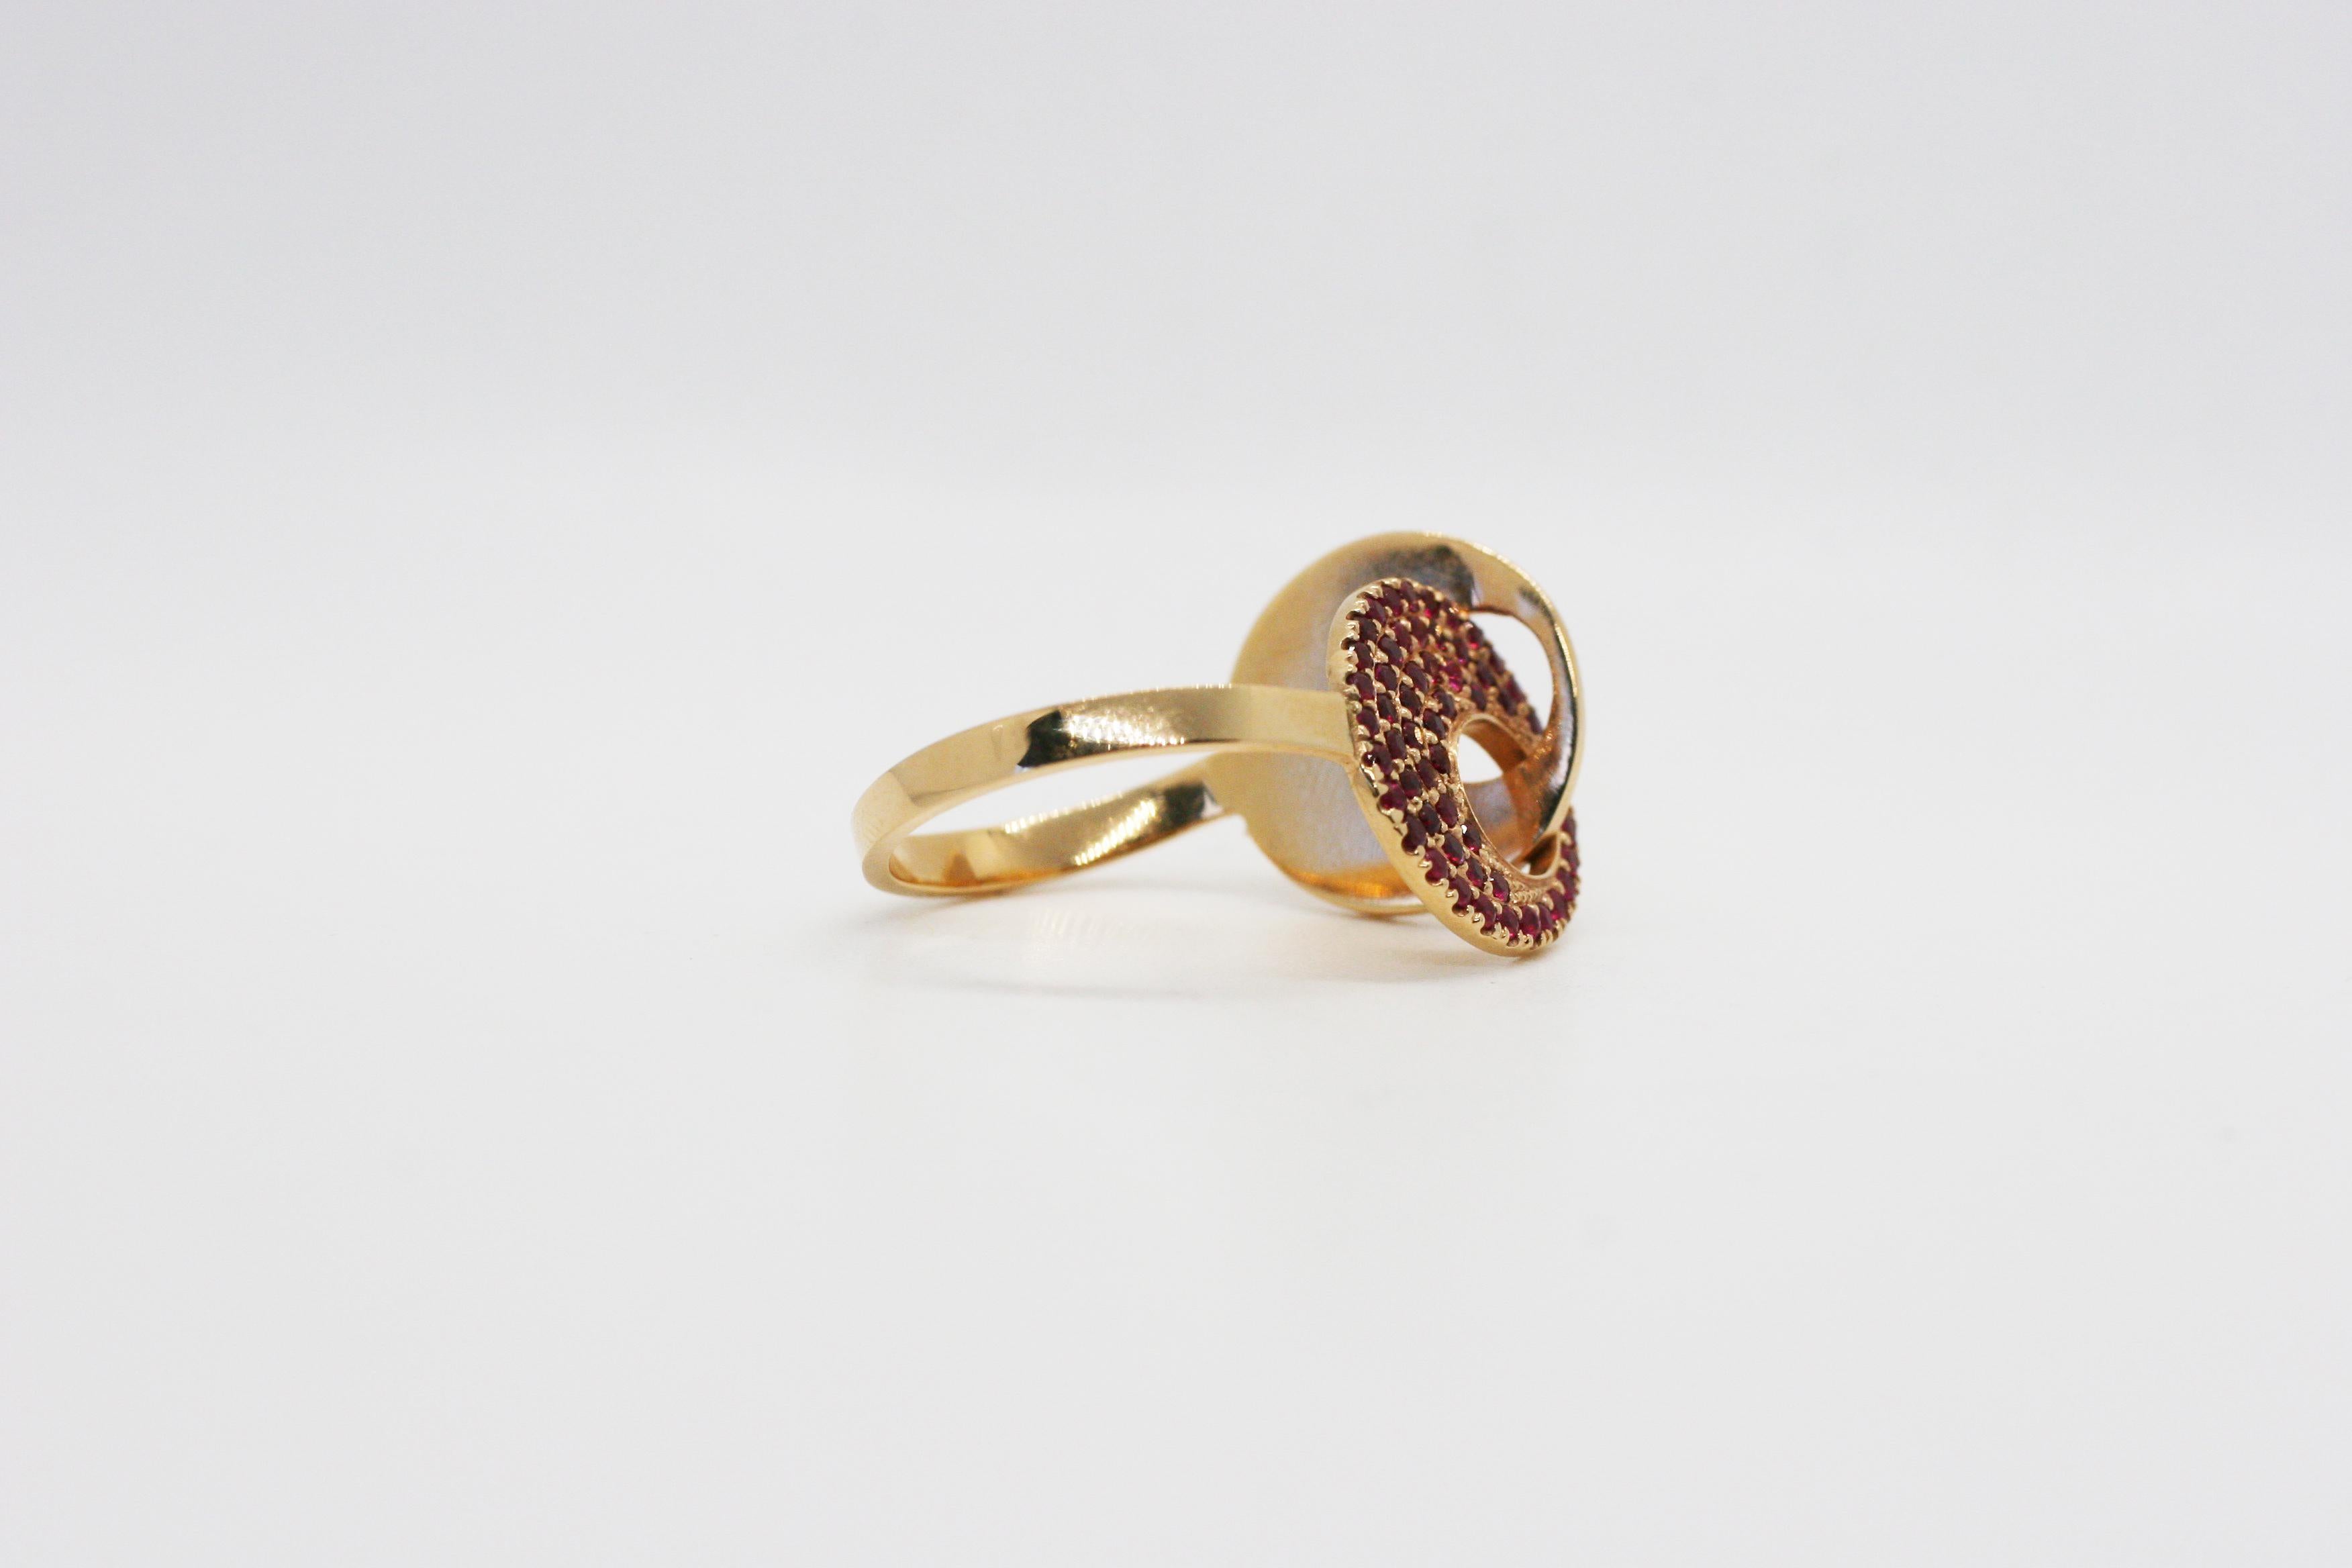 Perez Bitan's Interlocking Circles Ring features a solid 18k rose gold band with one architectural Rose Gold circle interlocking with a Rose Gold circle with 55 pave set rubies 
Band can be resized 

